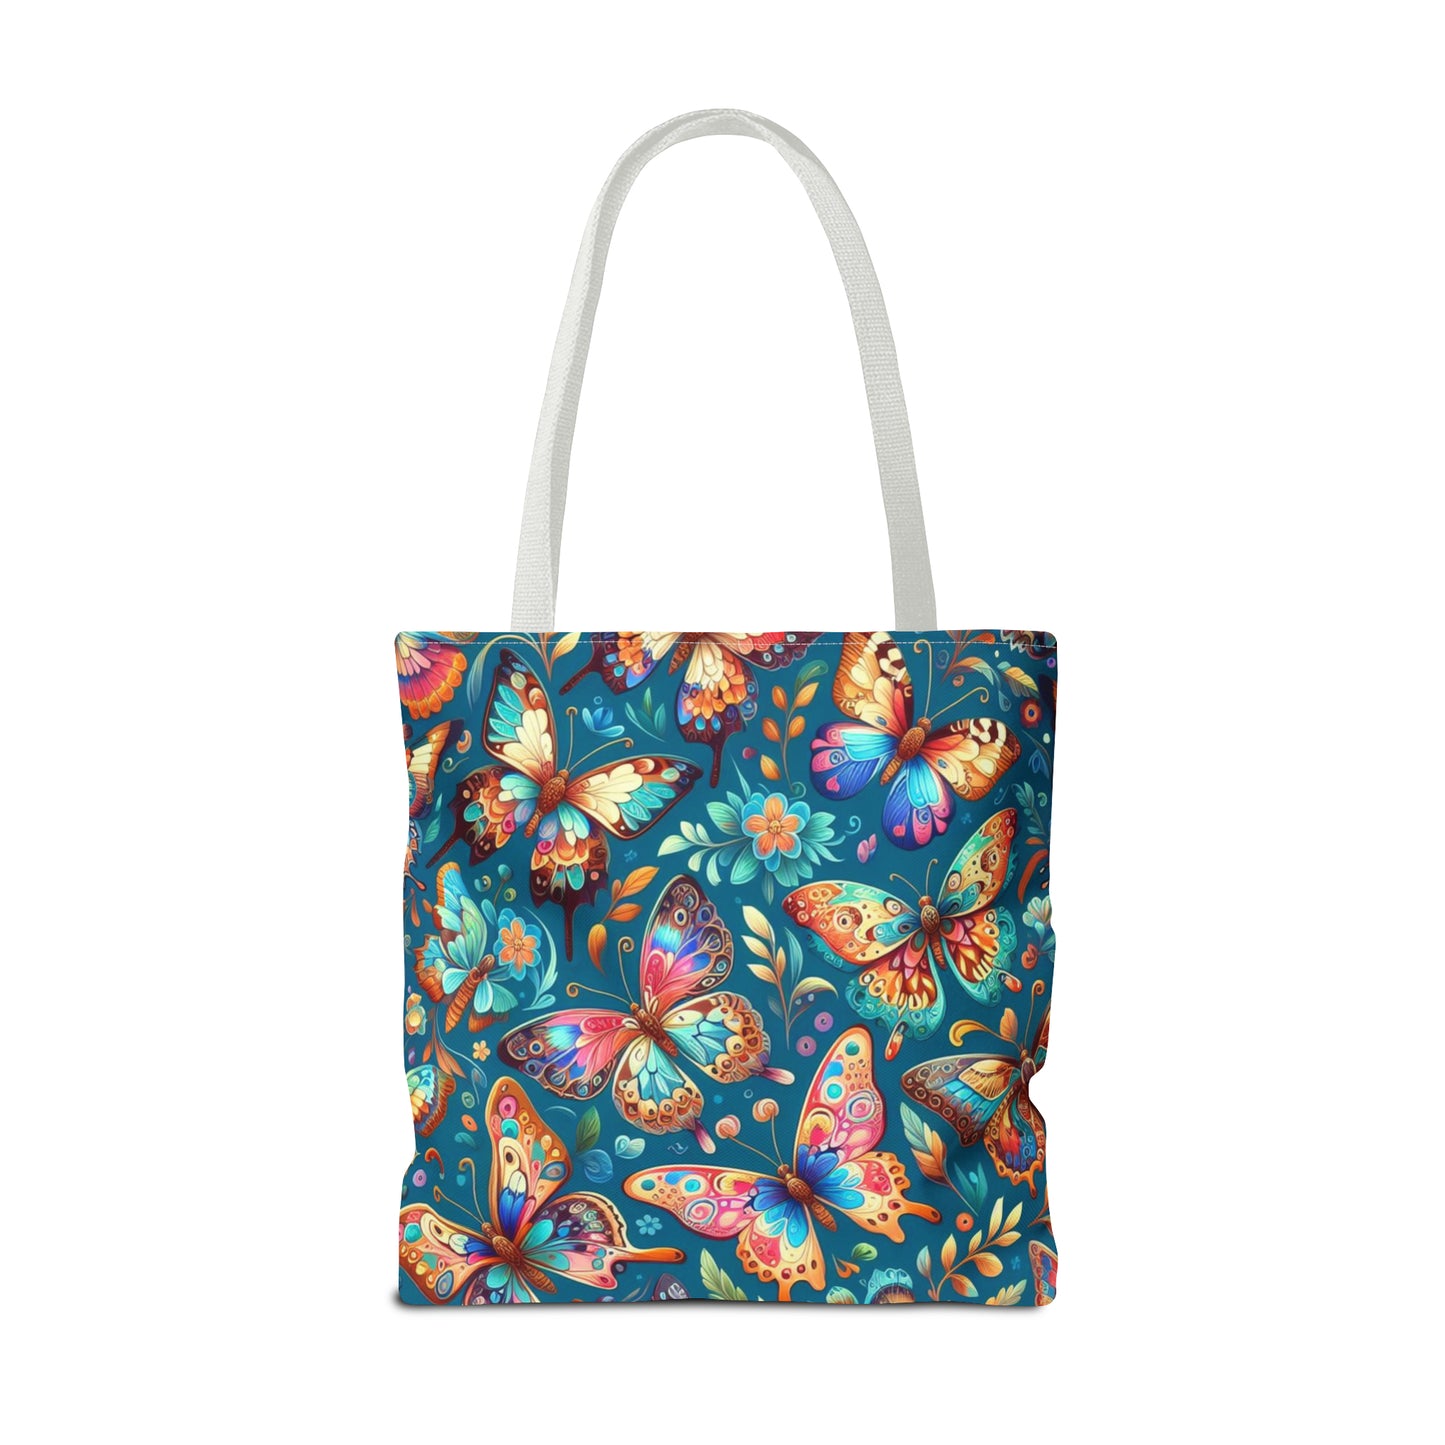 Personalized Tote Bag for daily use (Butterflies with blue background)